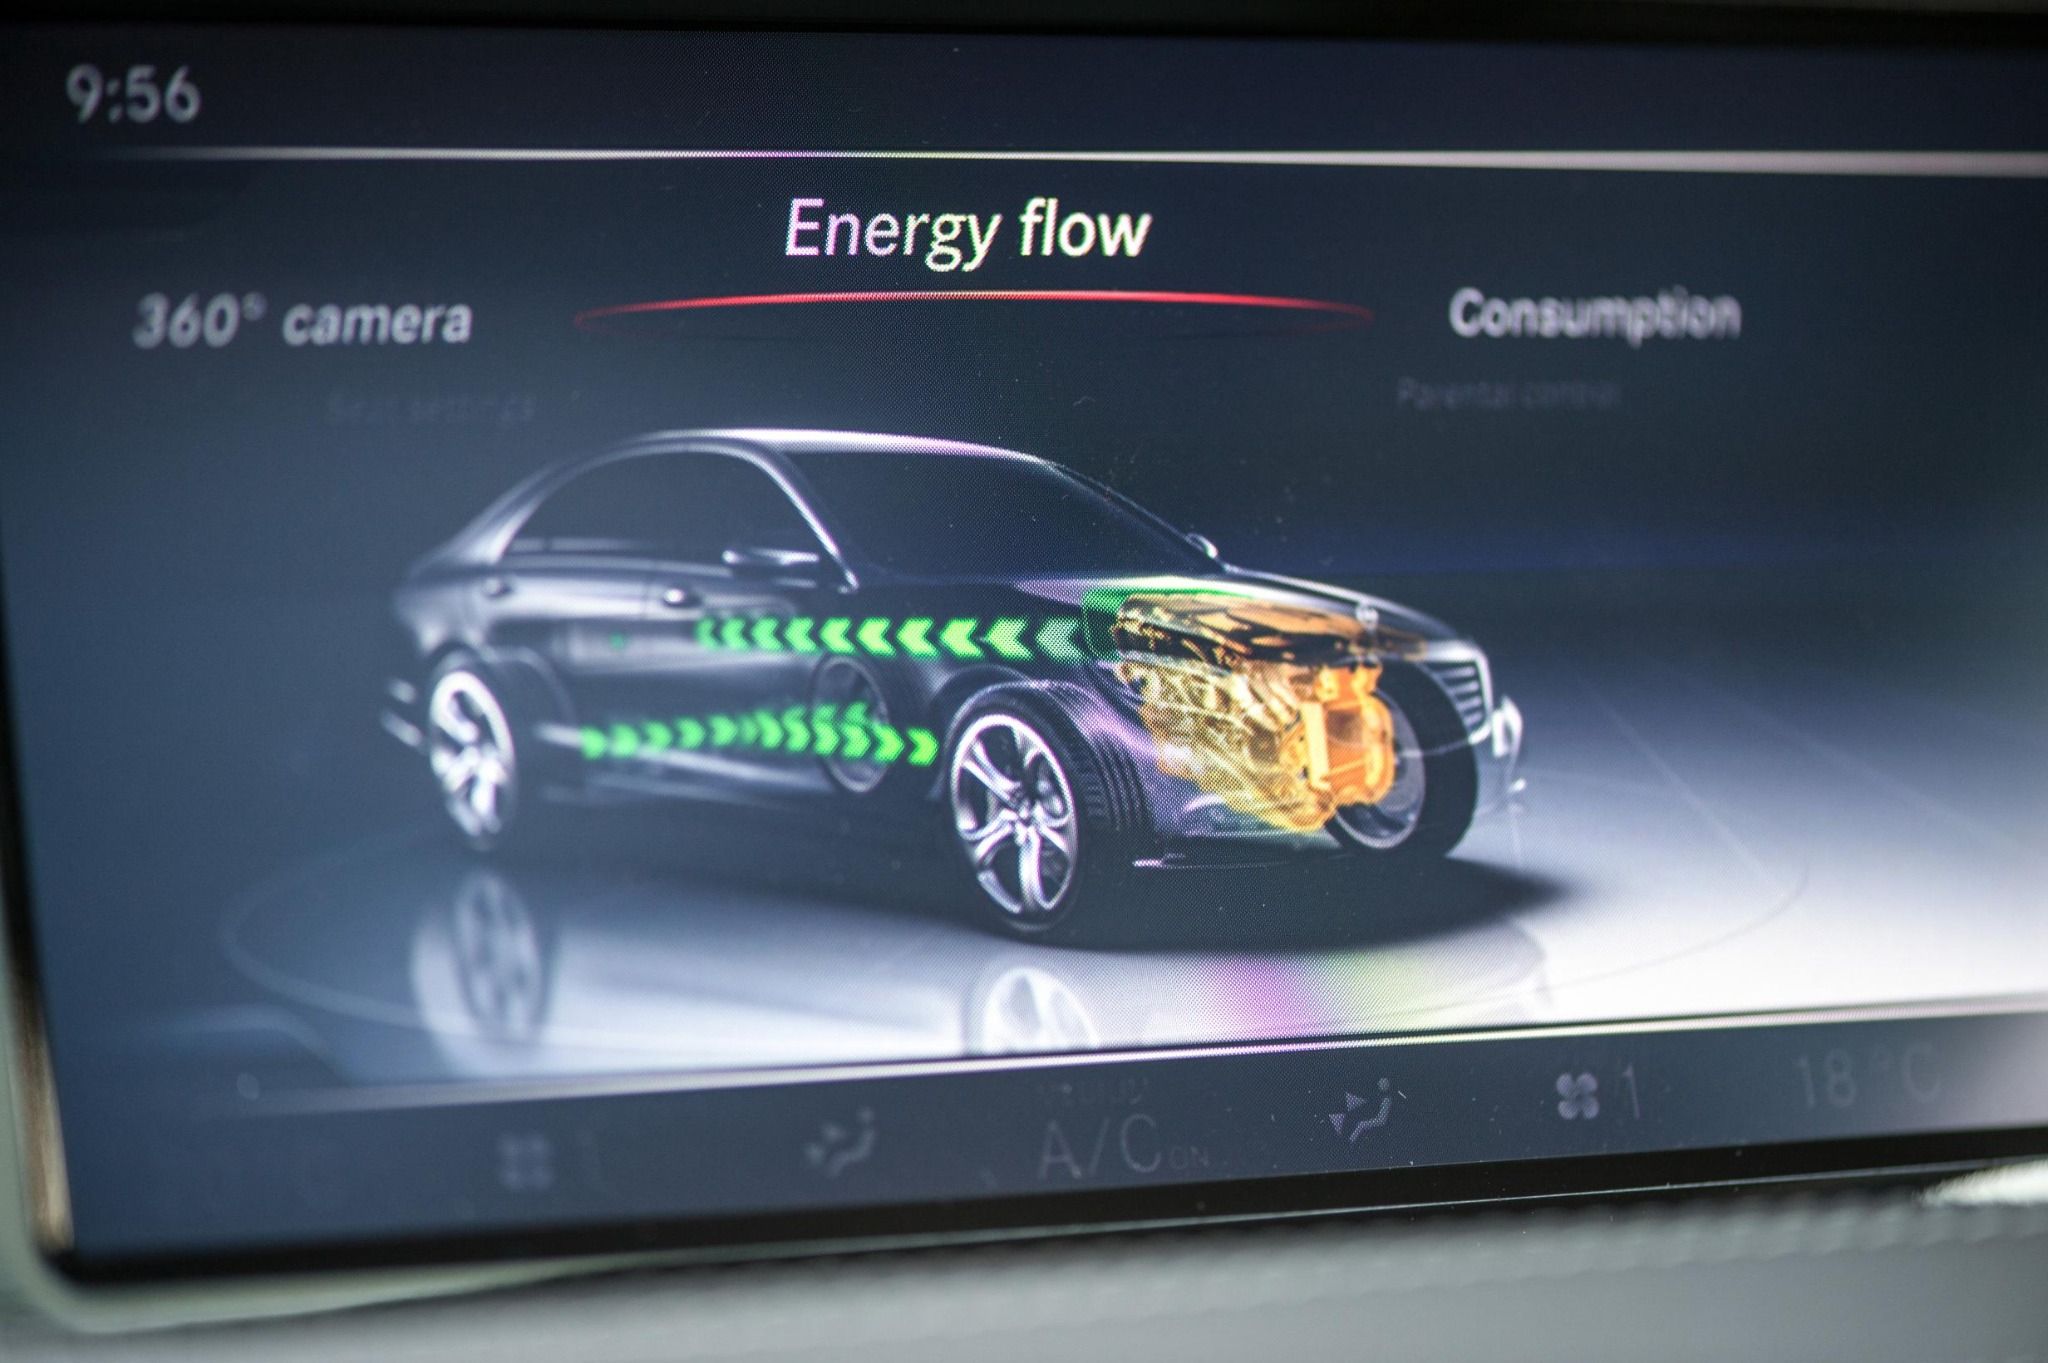 Display showing the hybrid flow of a petrol hybrid